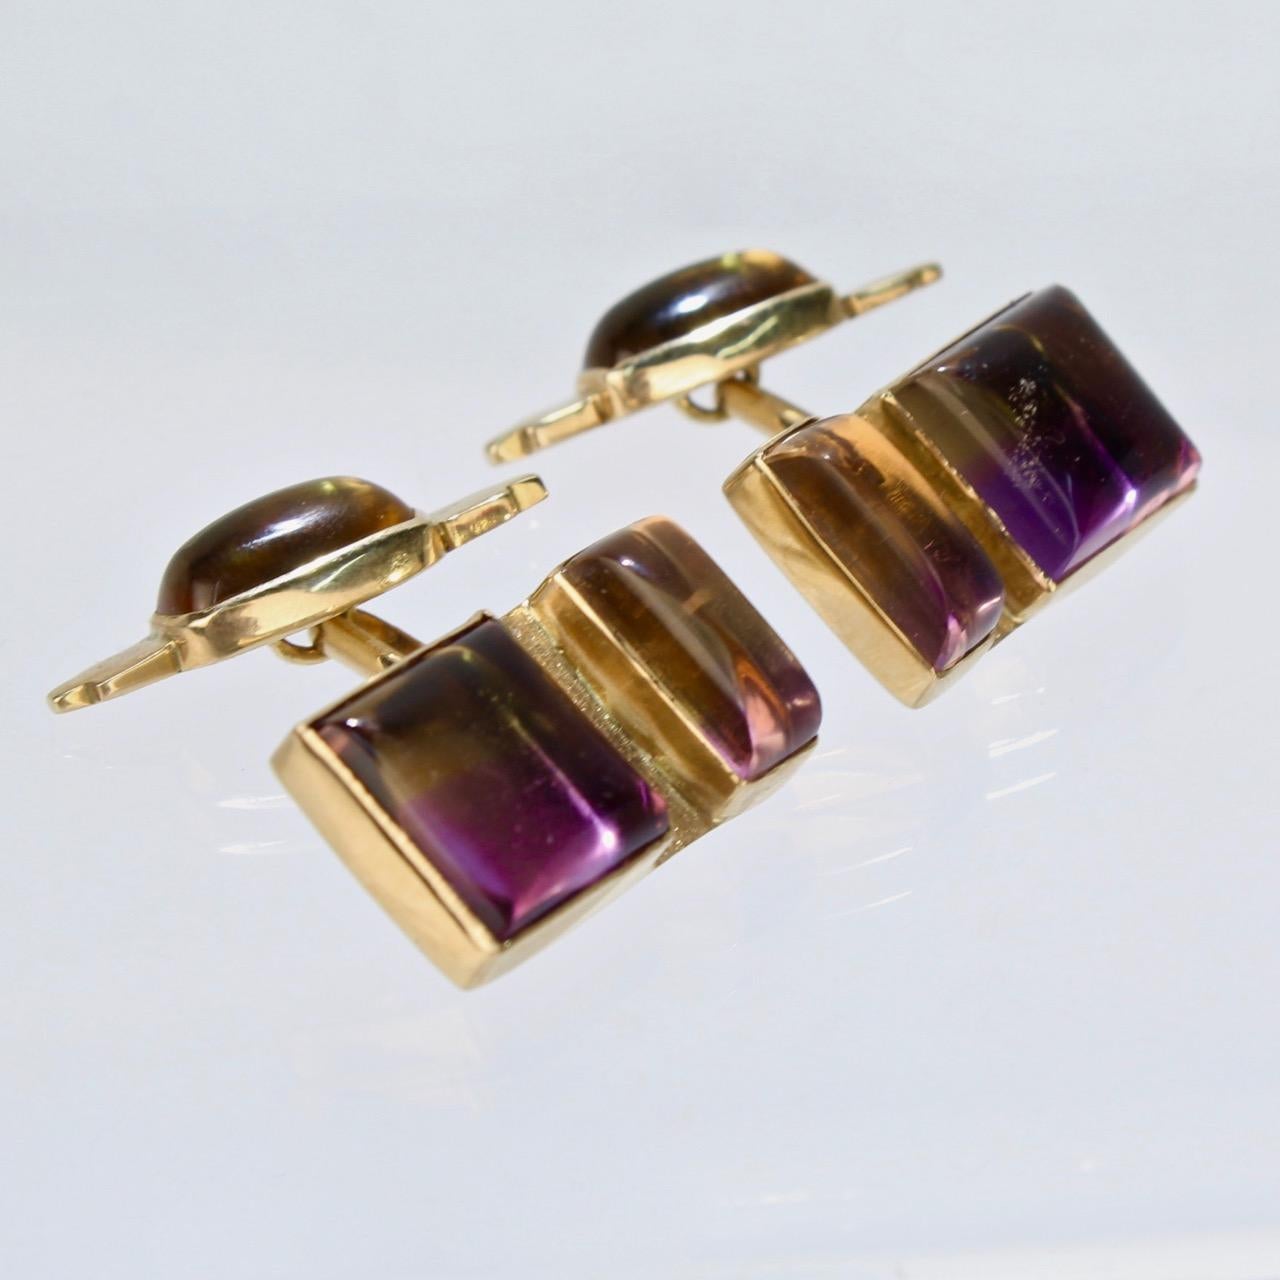 A very fine set of bezel set ametrine and gold cufflinks by Isabelle Posillico. 

These wonderful ametrine gemstones (amethyst to citrine) are set in a combination of 14k, 18K, and 22K gold and present as a truly striking pair of cufflinks. 